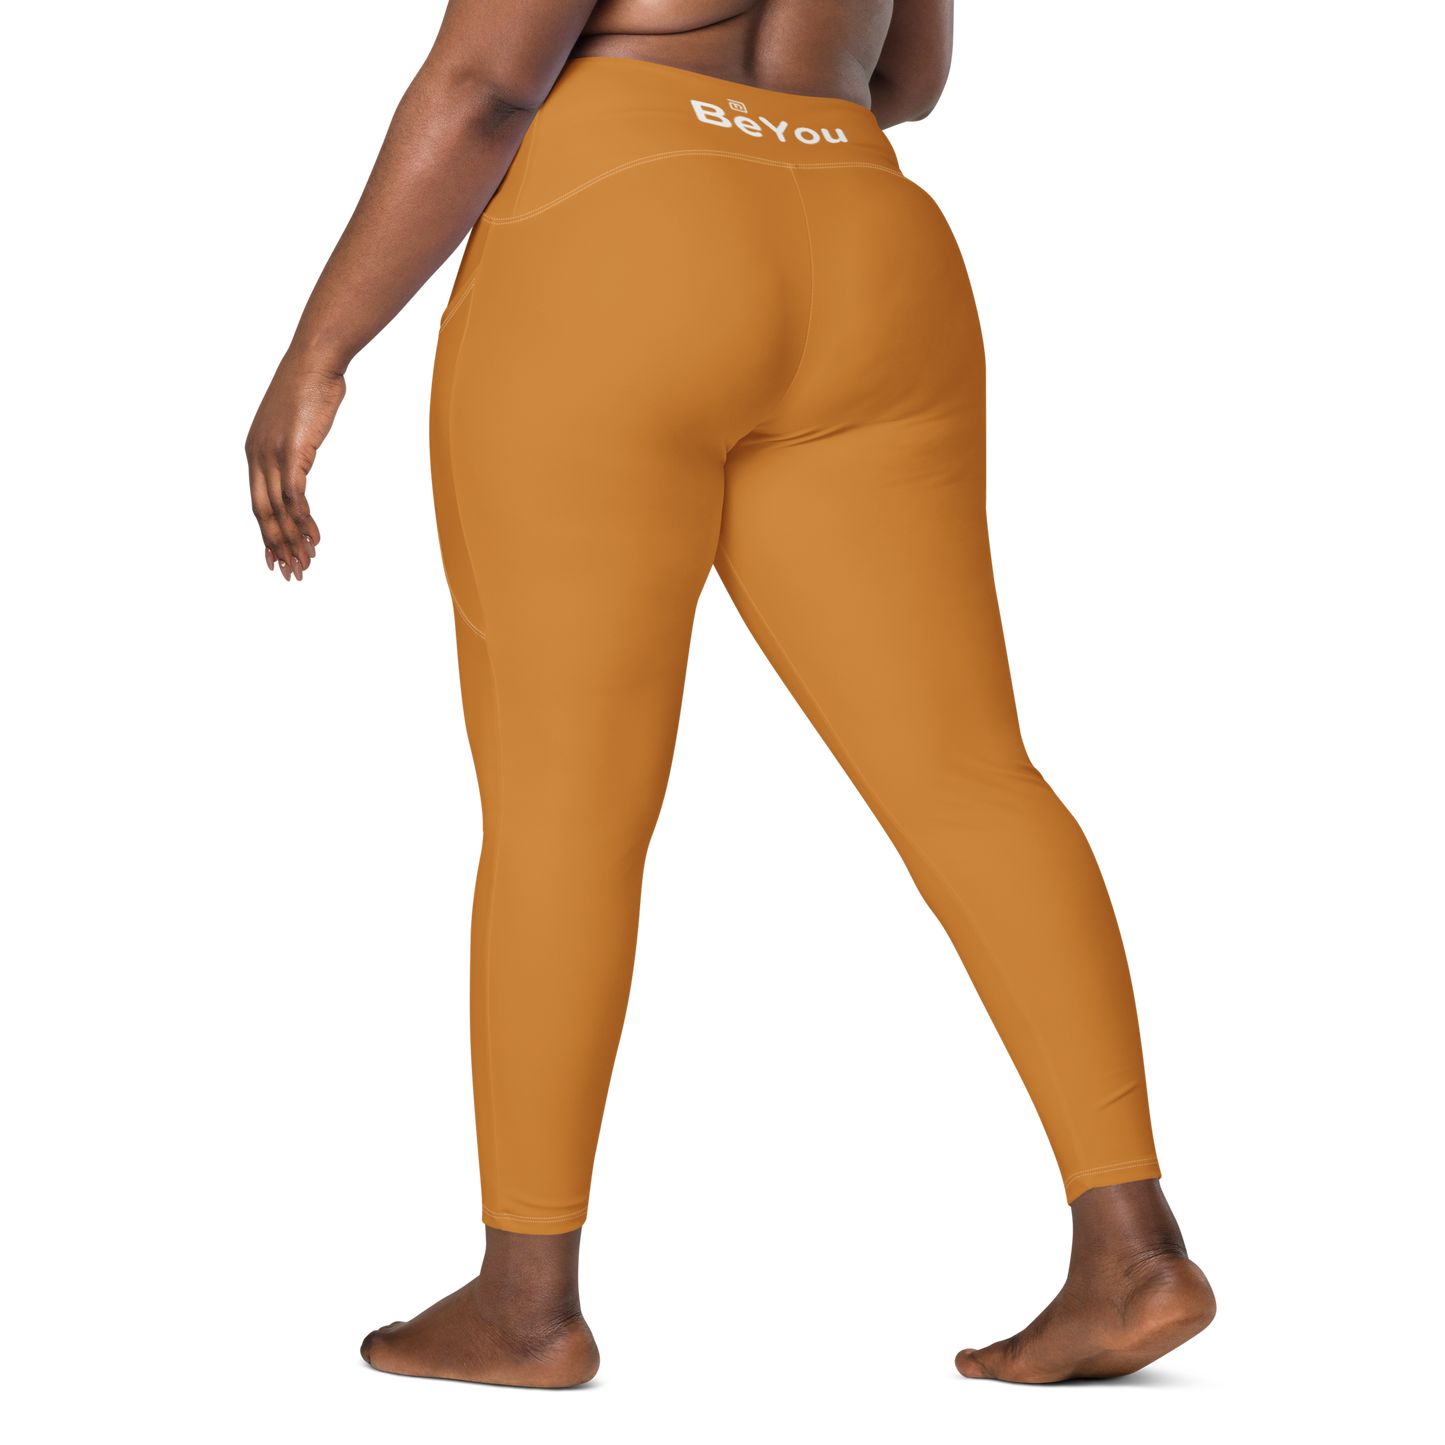 Bronze Crossover Leggings with Pockets